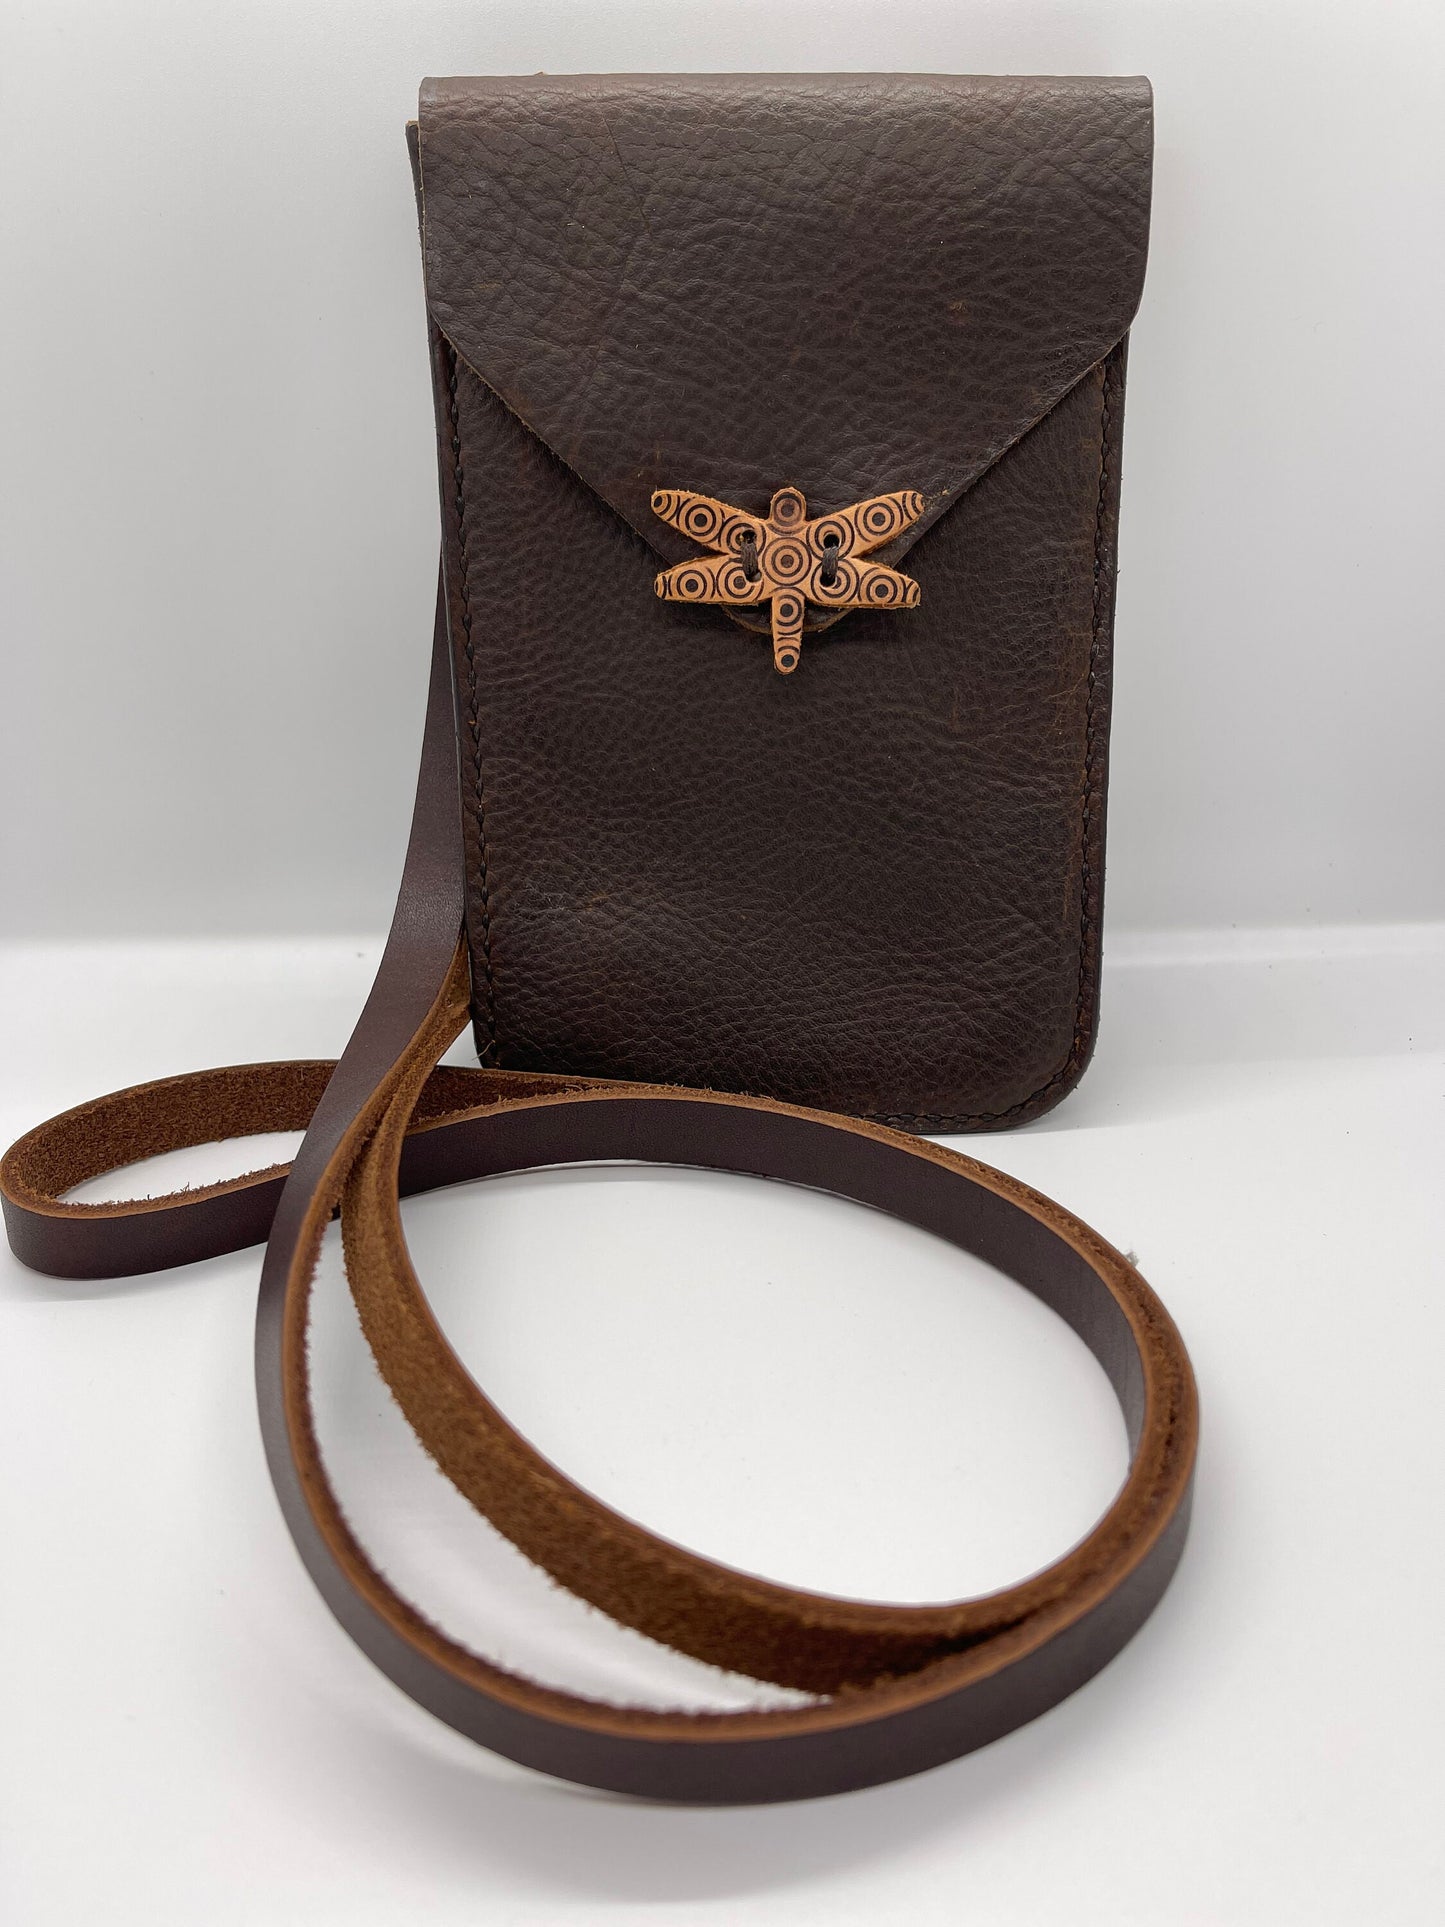 Boho Chic: Small Leather Cross-Body Bag - Handcrafted with Dragonfly